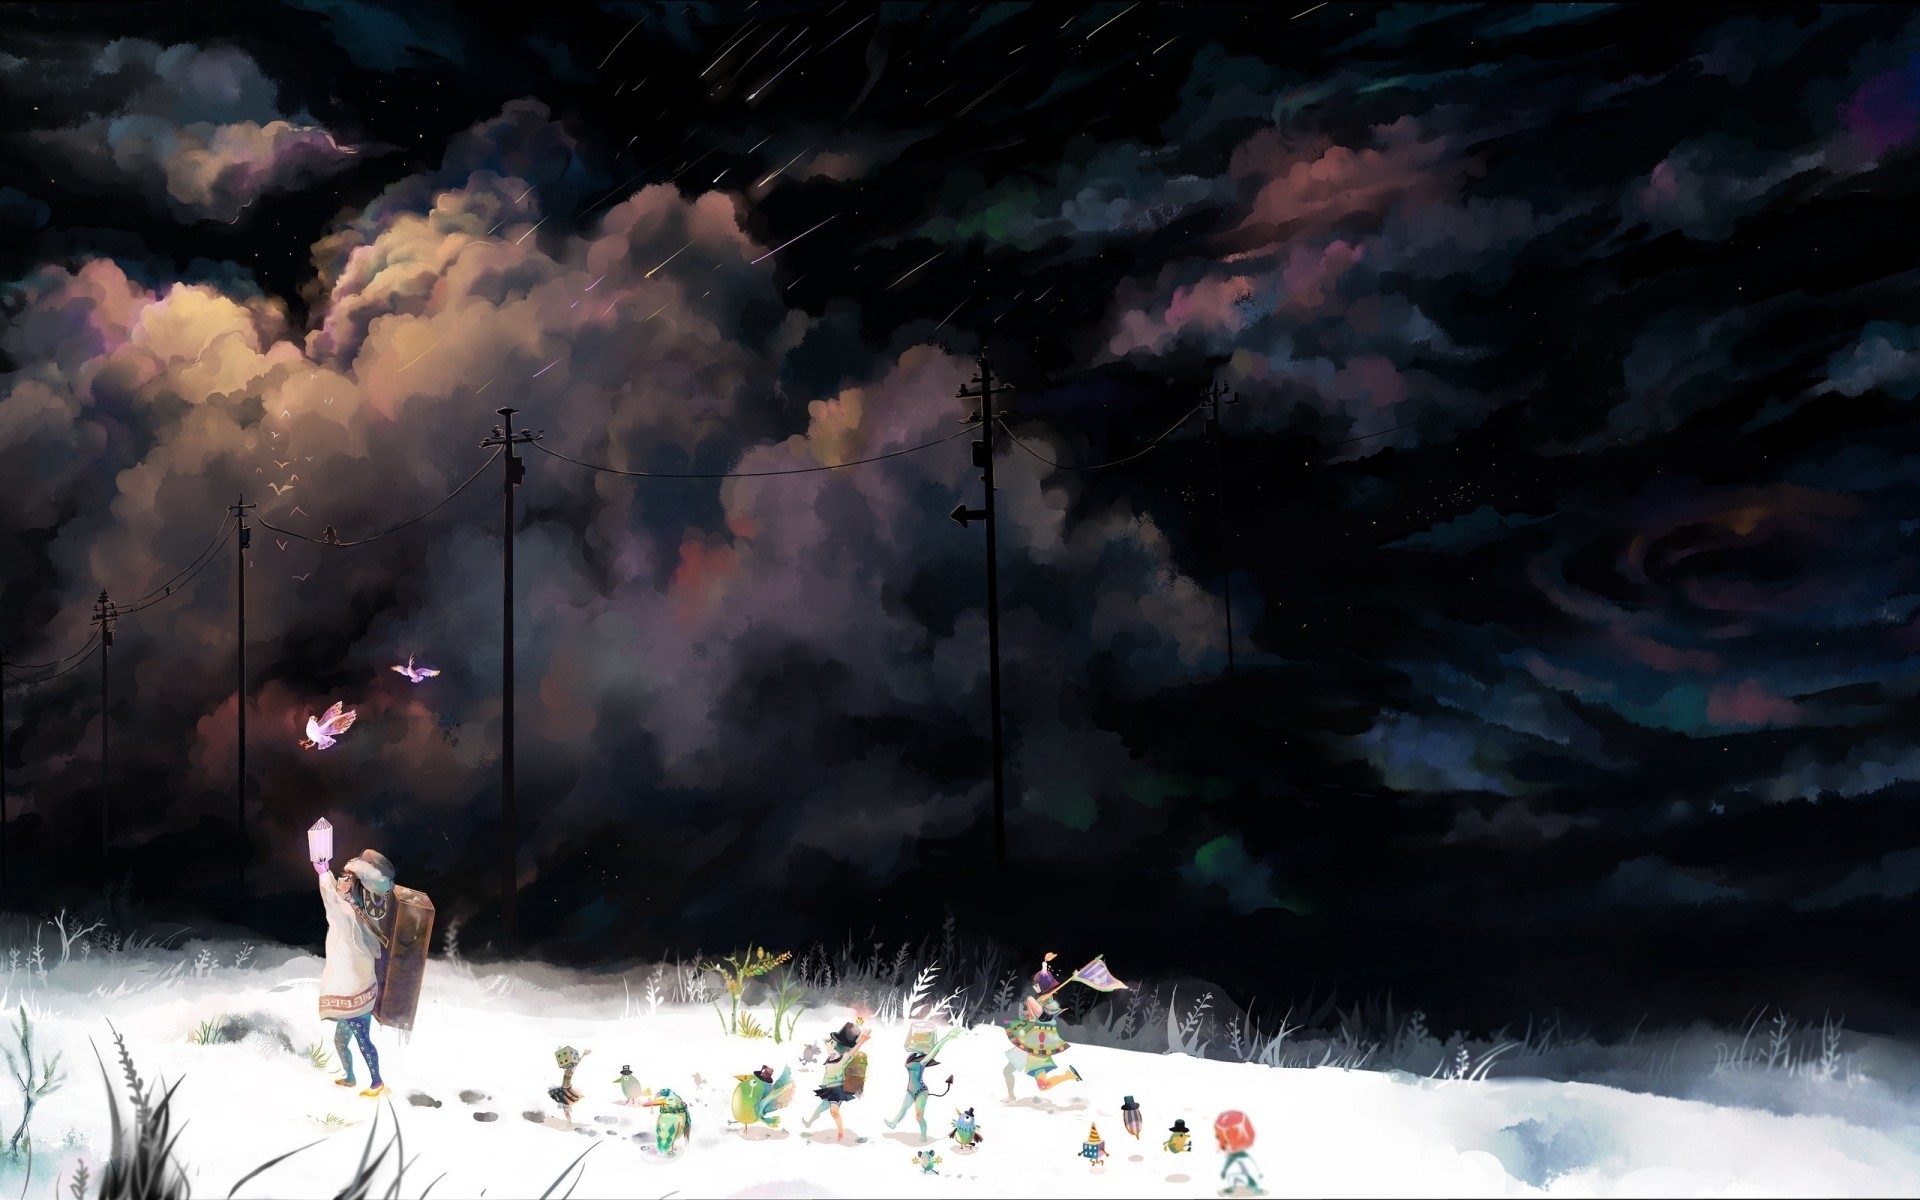 drawings competition landscape light action outdoors snow storm anime cartoon photo picture scene